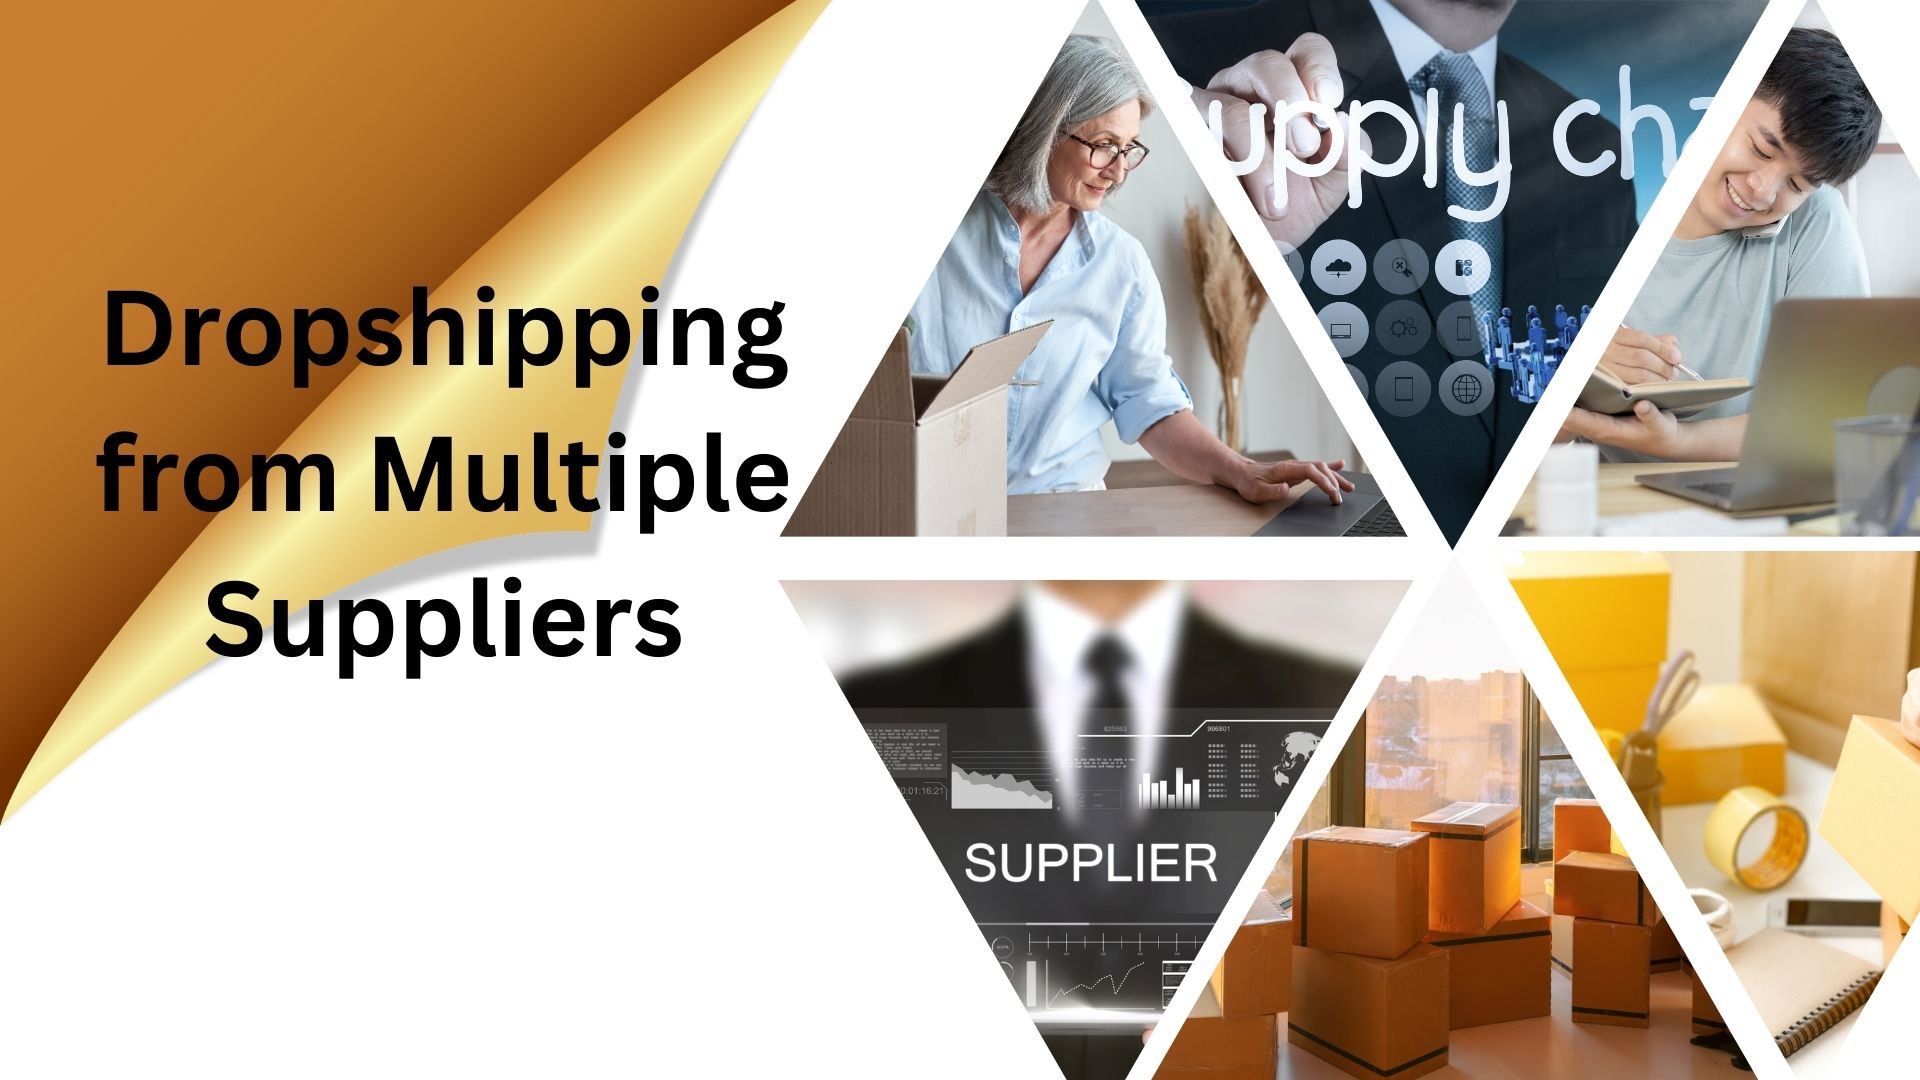 Dropshipping from Multiple Suppliers